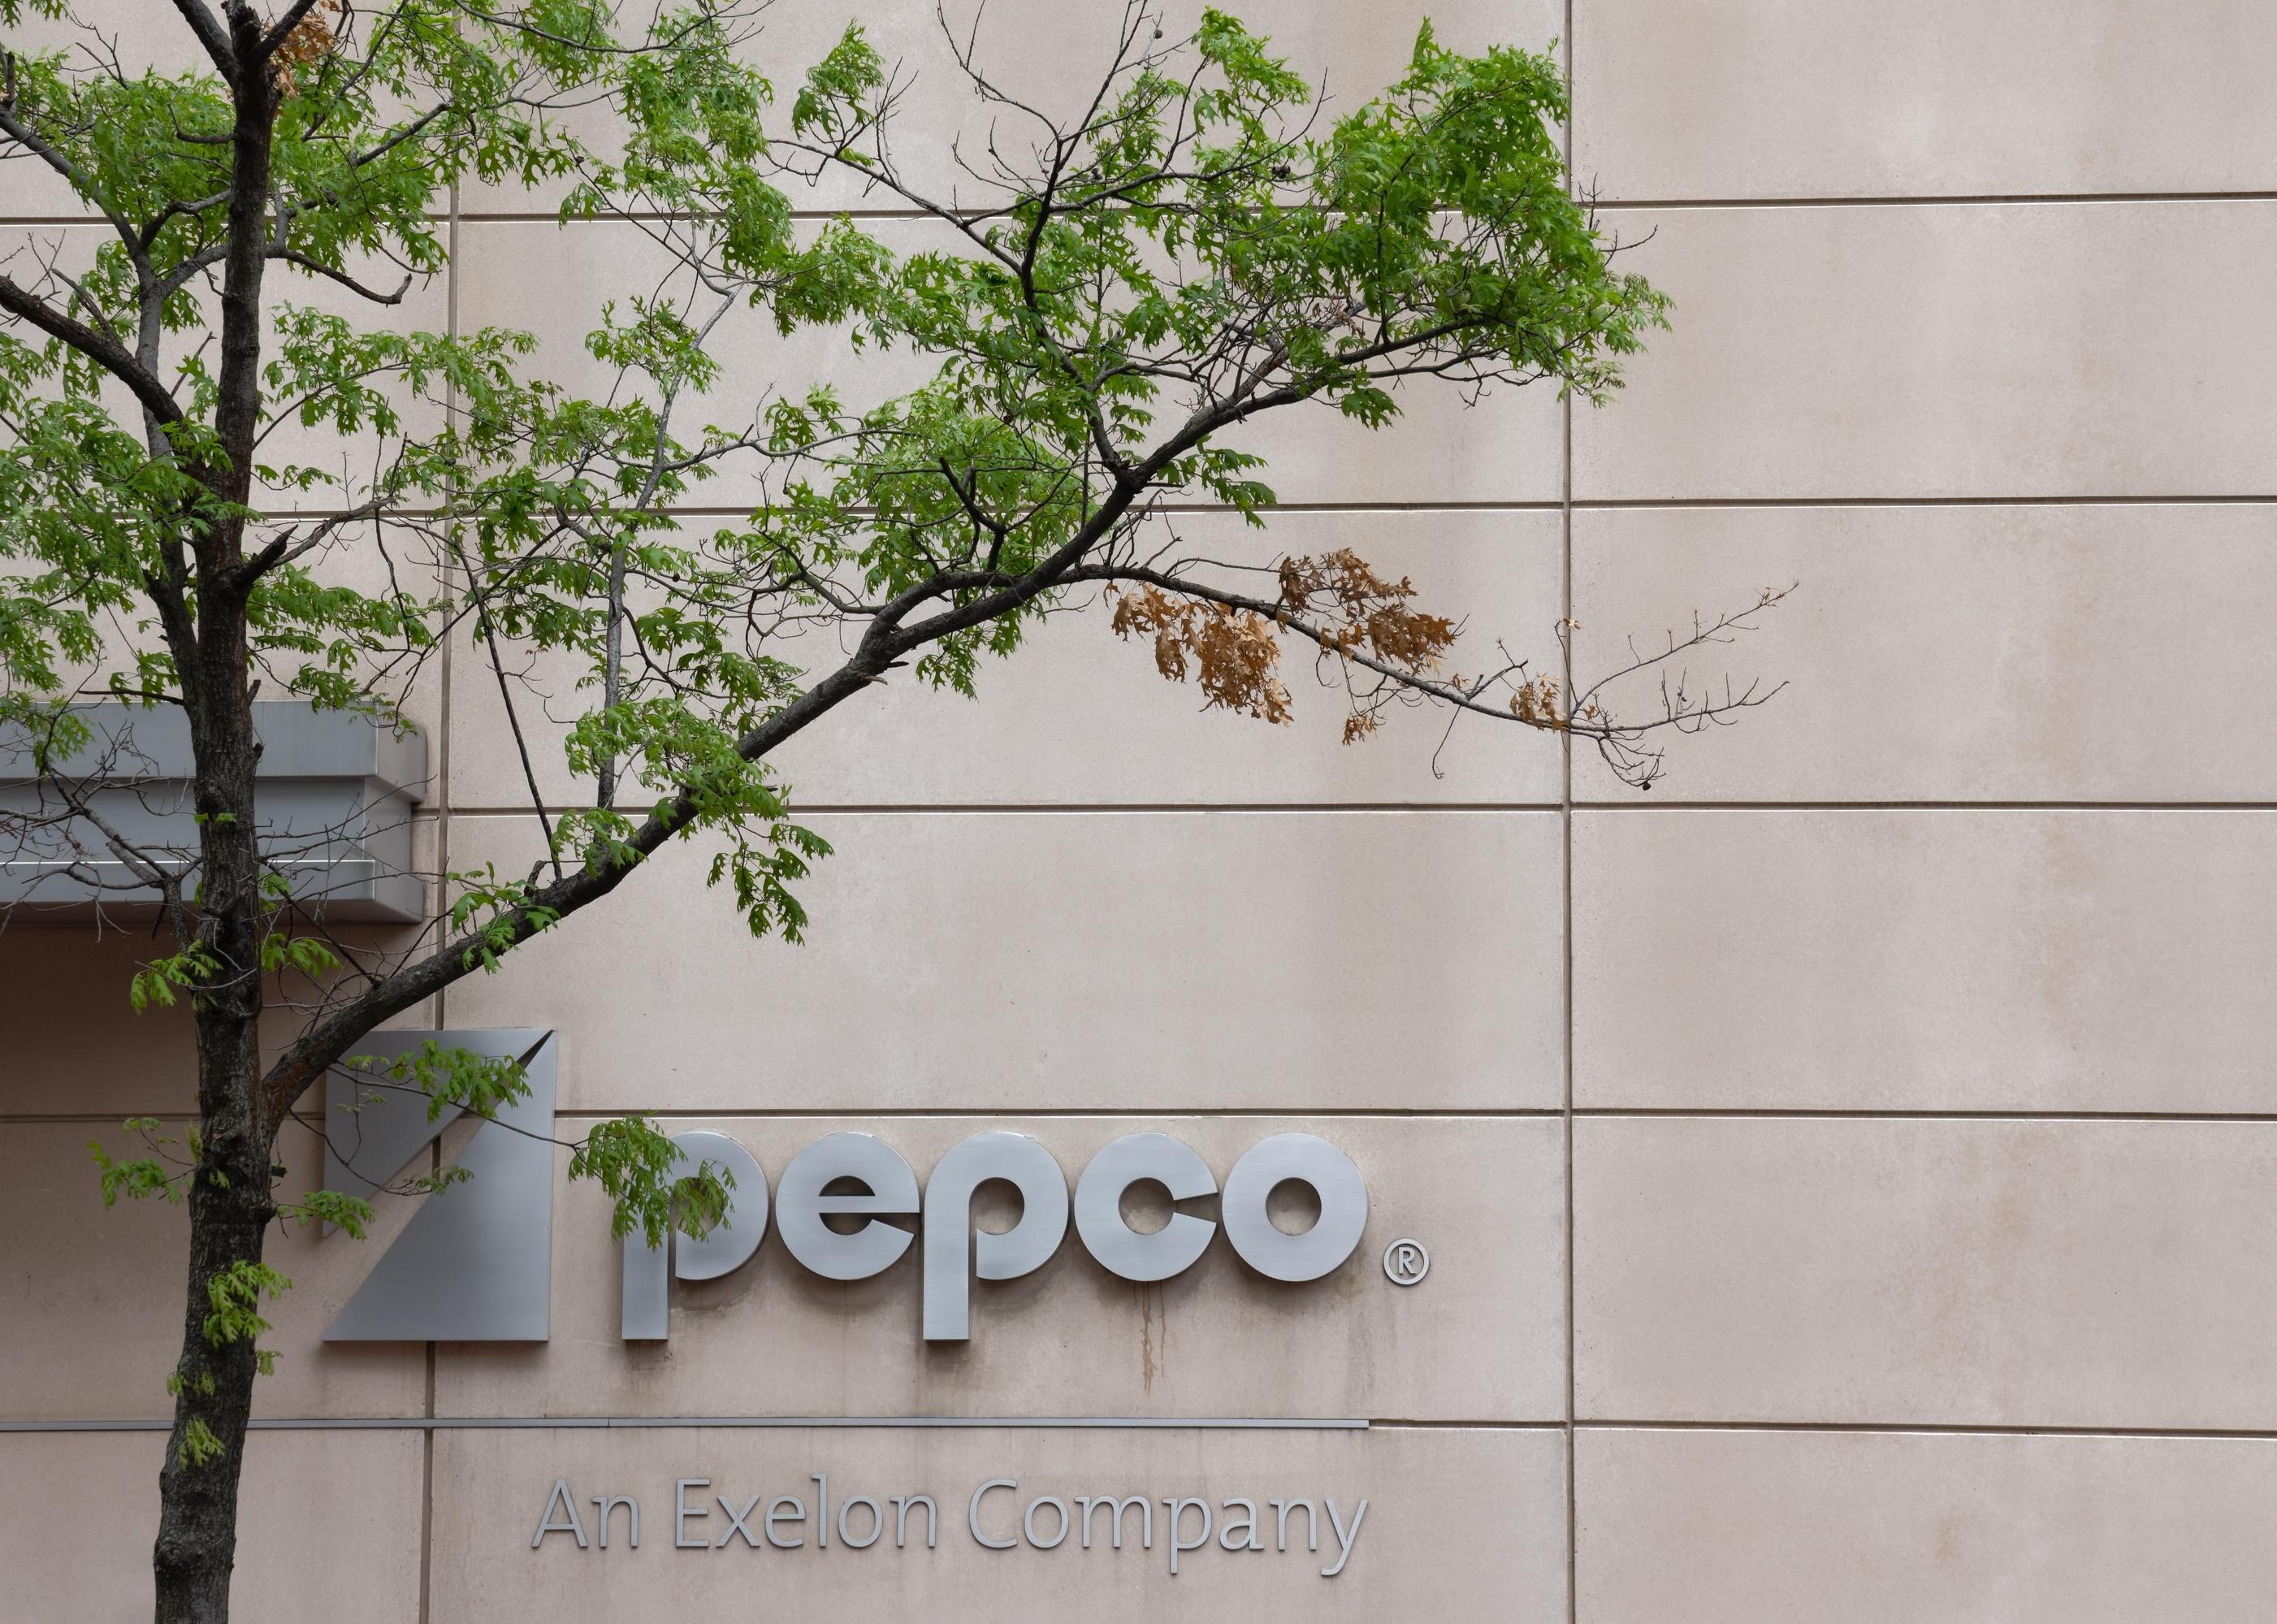 Pepco sign on a building.